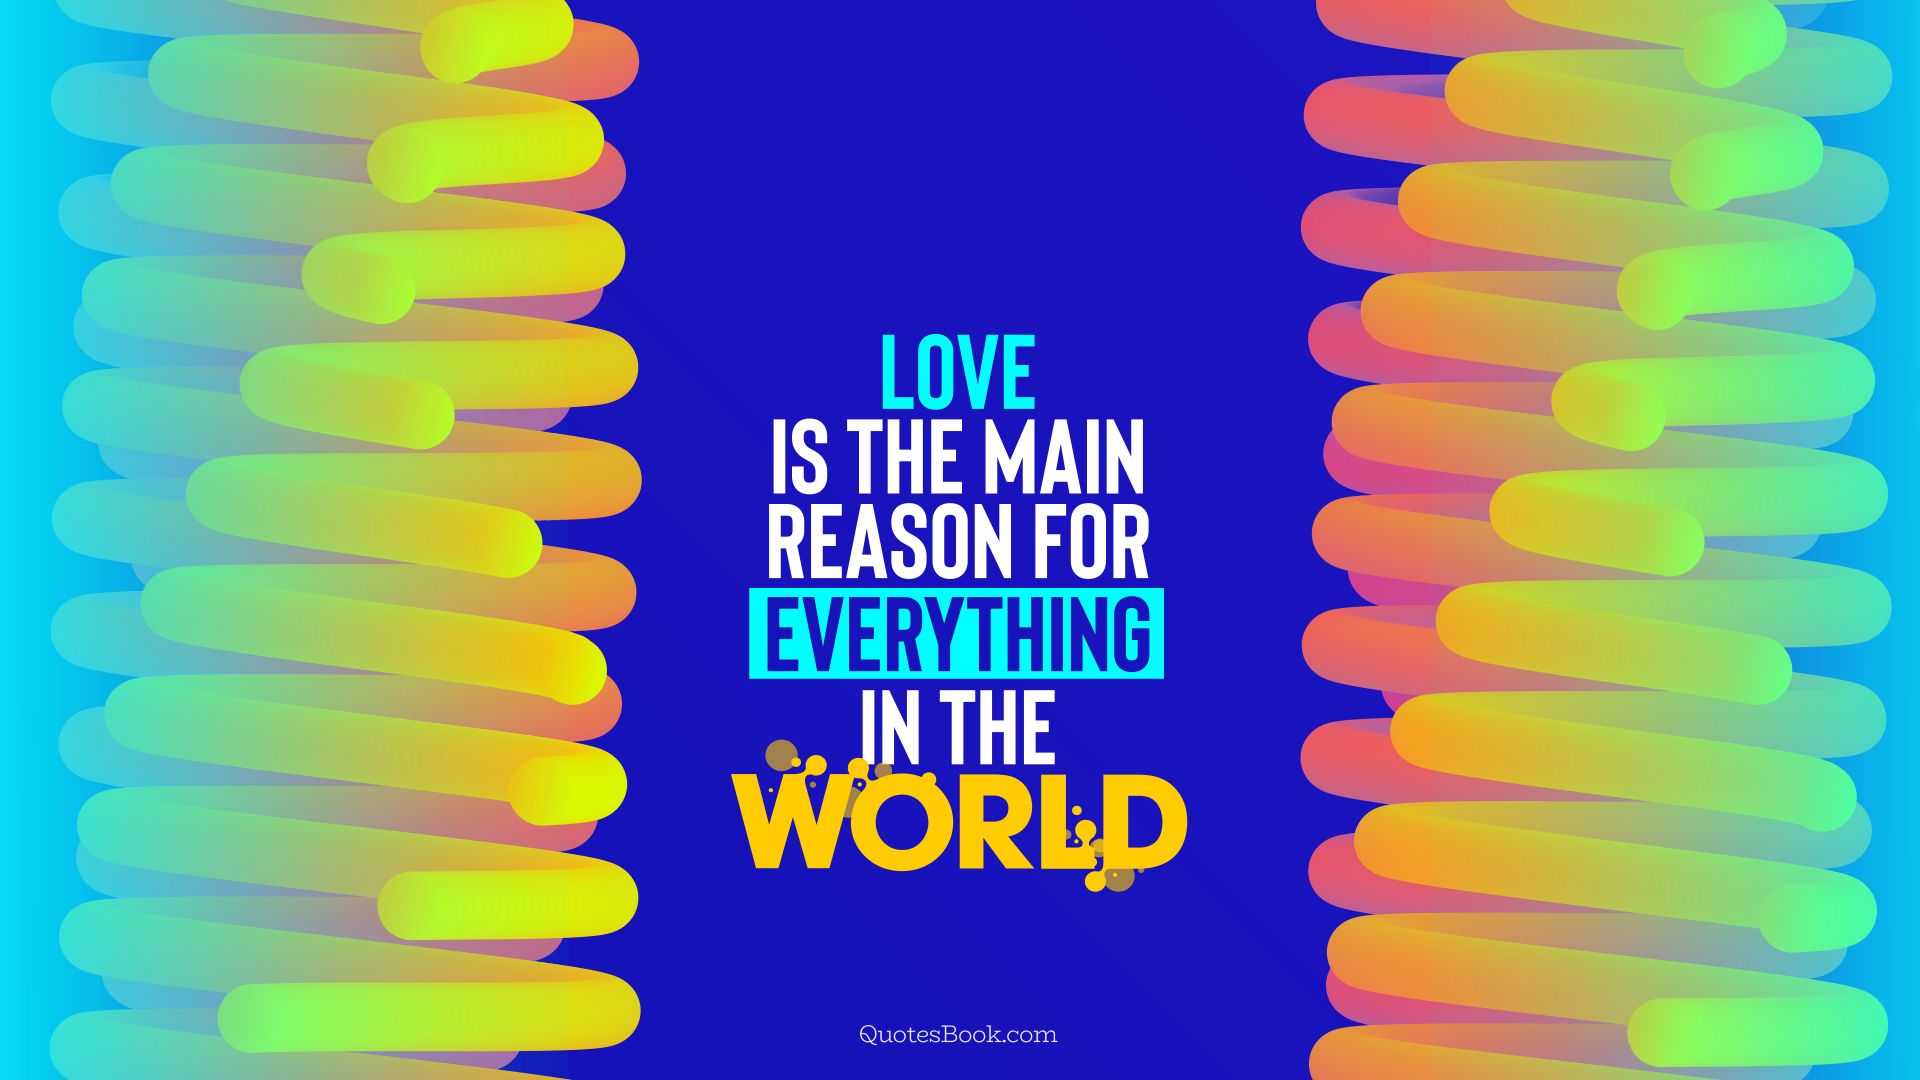 Love is the main reason for everything in the world. - Quote by QuotesBook